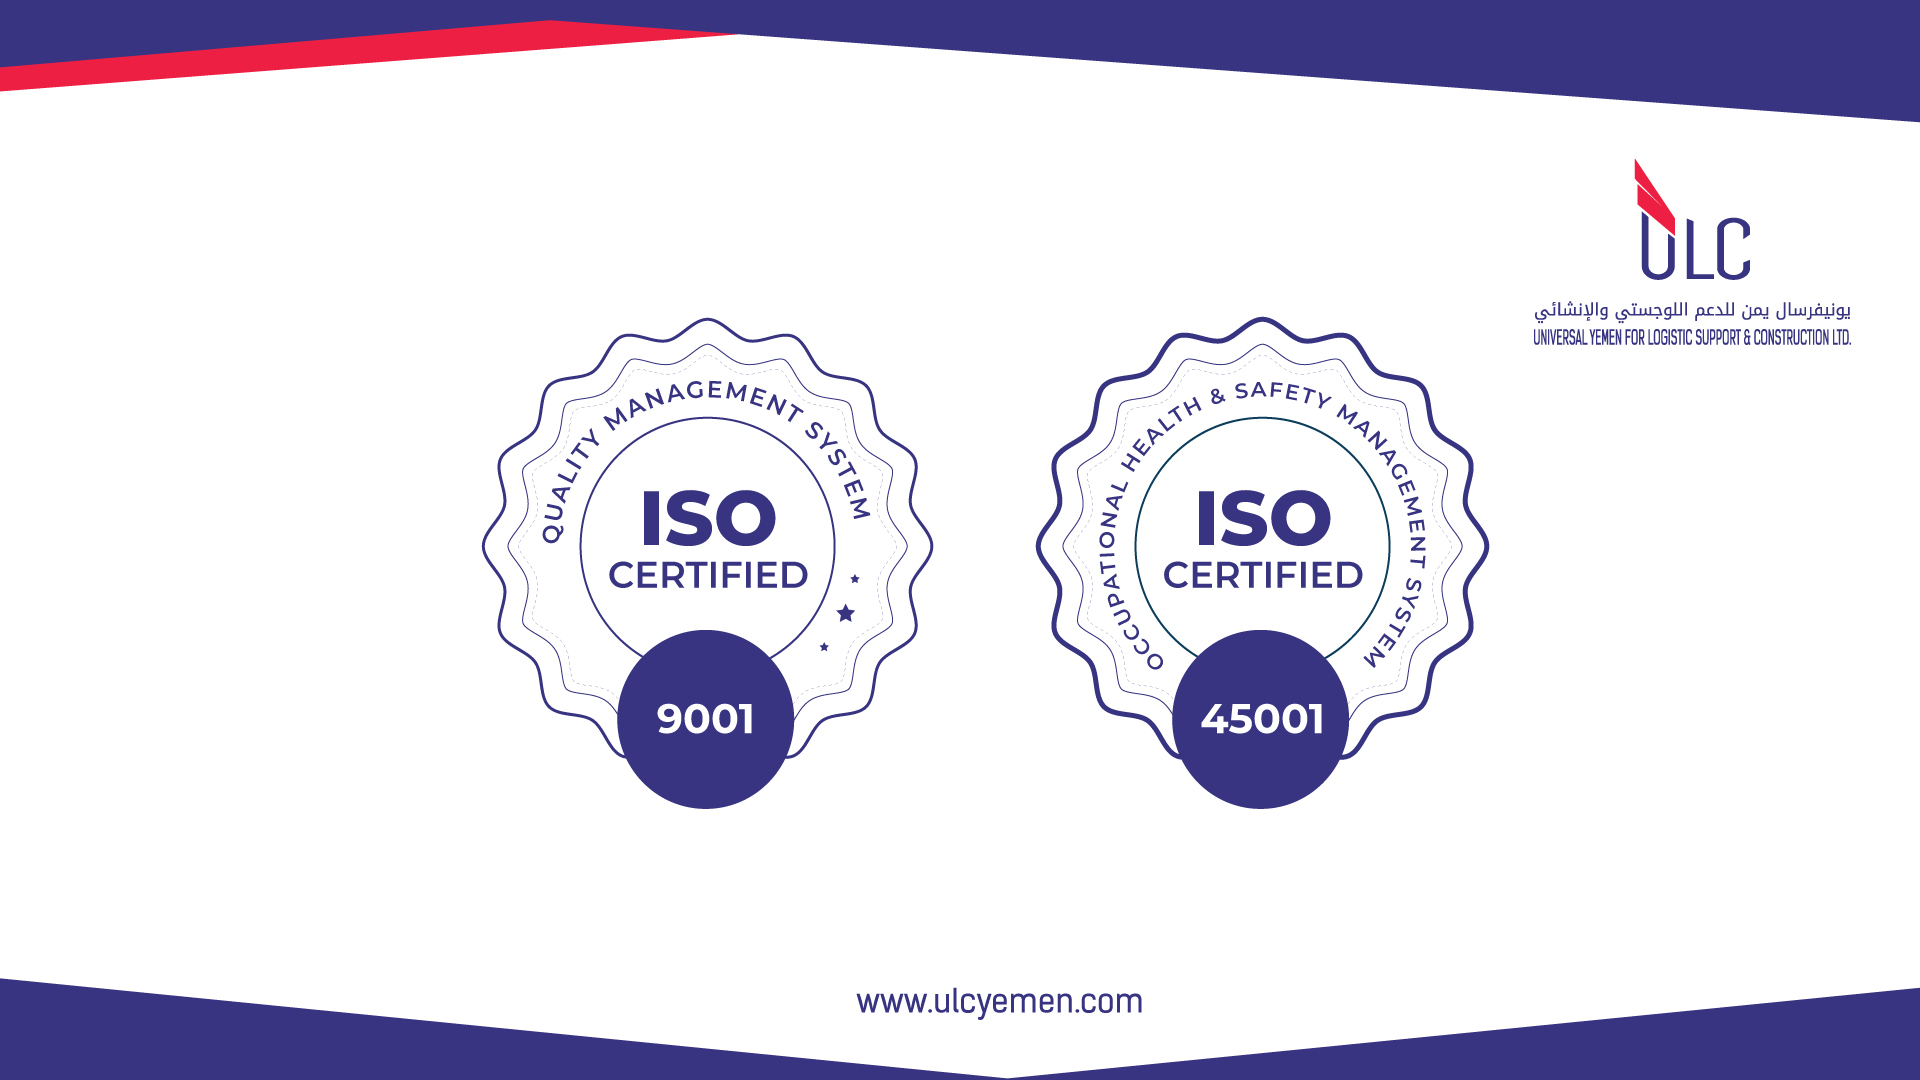 Universal Group- Universal Yemen for Logistic Support & Construction Obtains ISO 9001:2015 & ISO 45001-2018